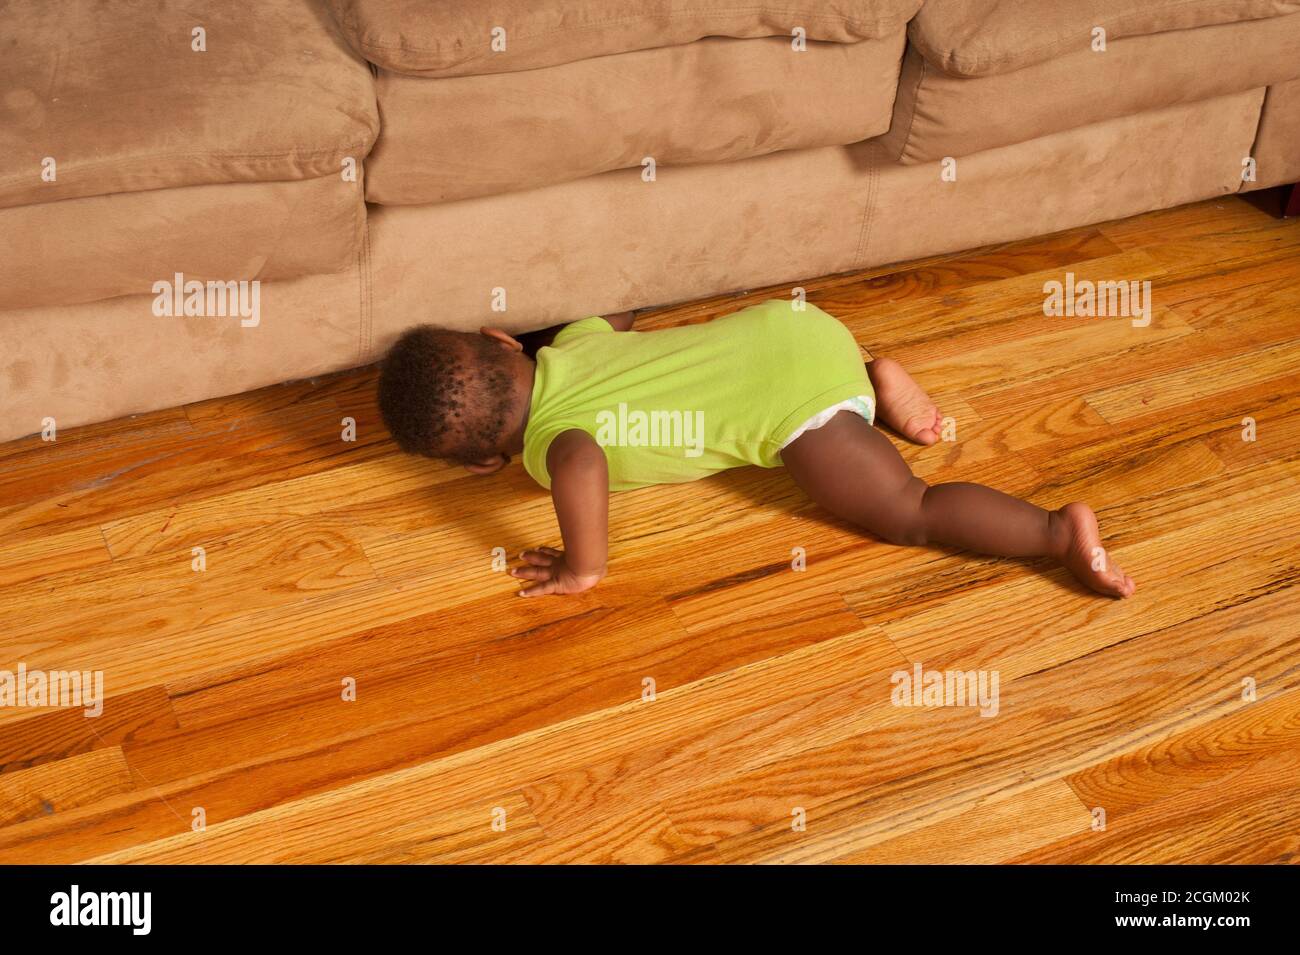 12 month old baby boy on stomach looking for toy that rolled under couch Stock Photo